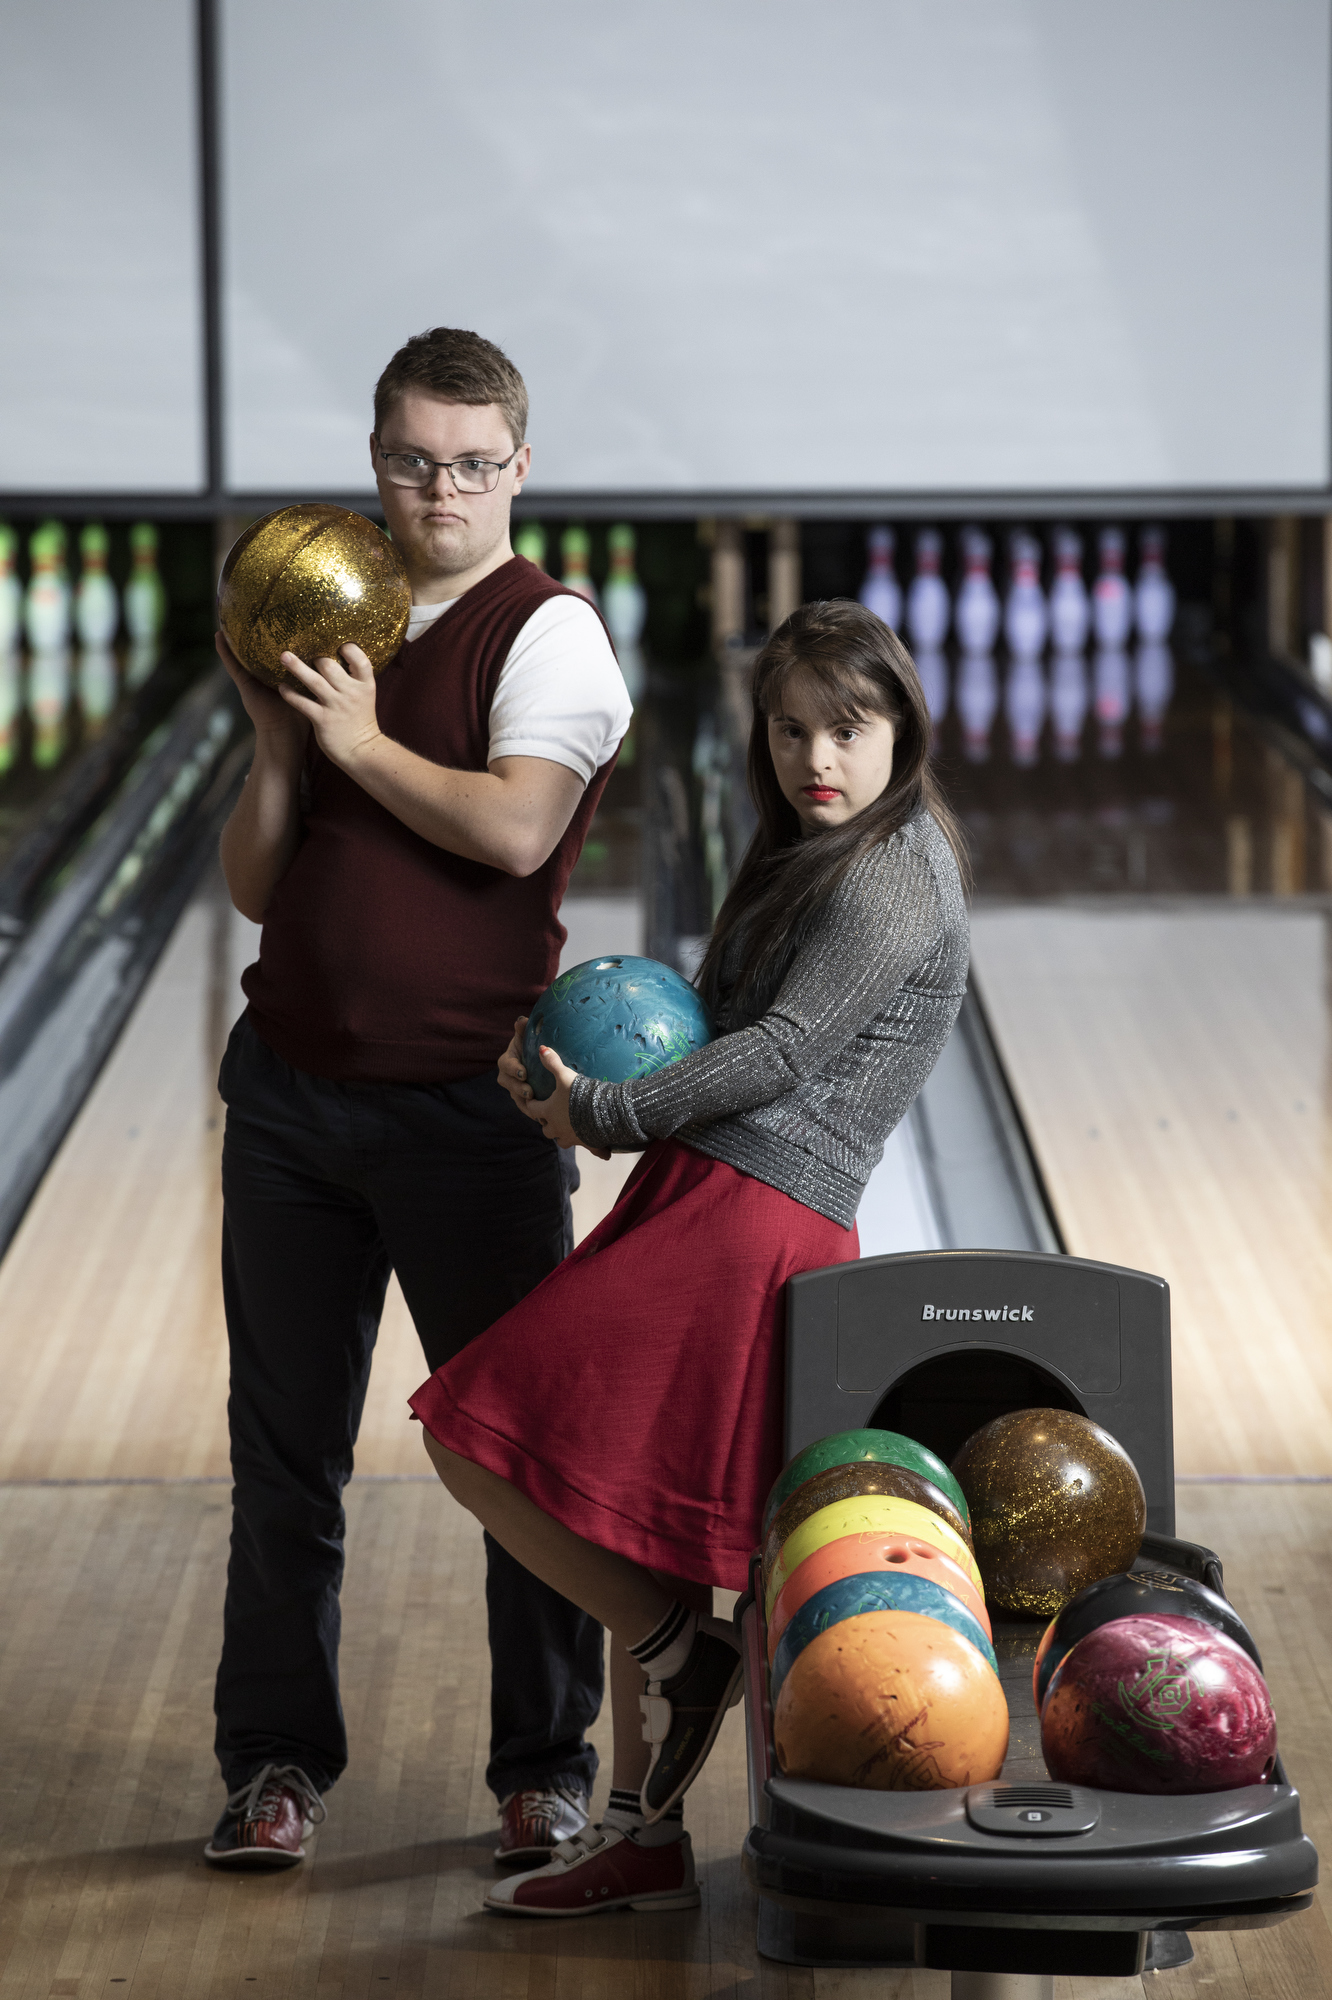 A blonde white man in a vest and pants and a brunette white girl in silver top and red skirt hold bowling balls in an alley.